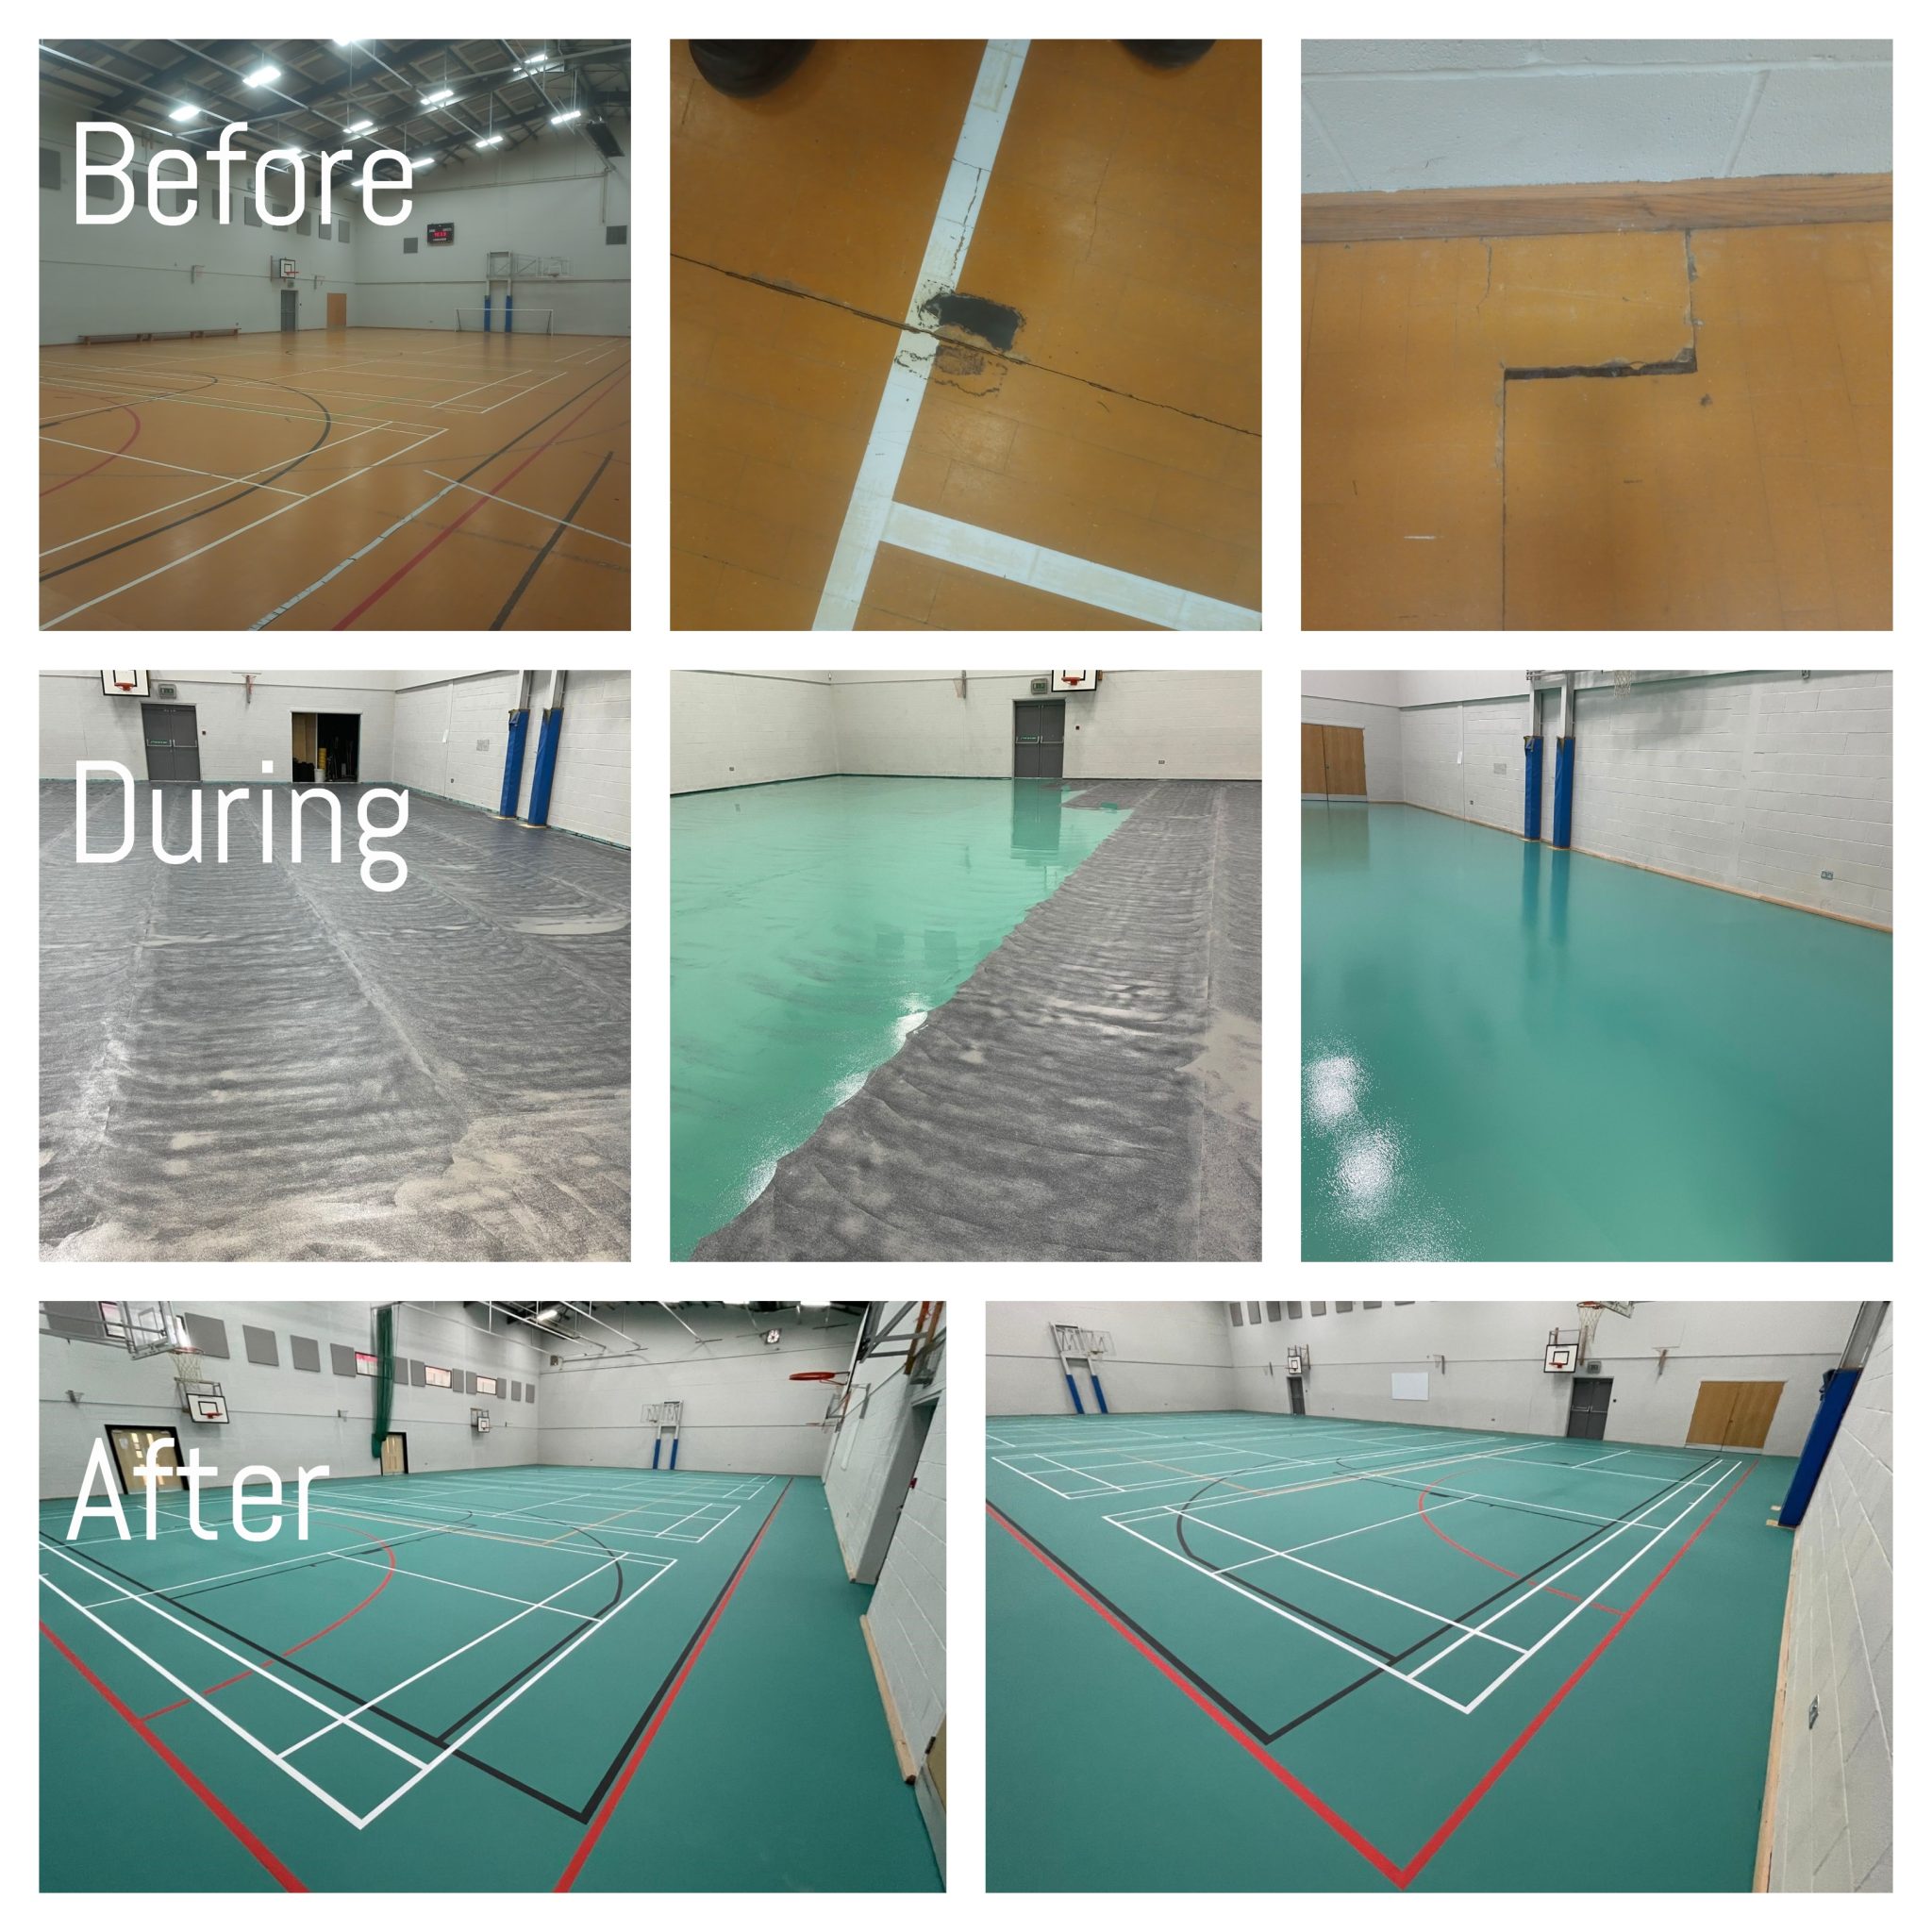 The SSUK team have been busy giving a new lease of life to an old existing Granwood floor in Blackpool. Check out the images below of this impressive 609sqm Pulastic 110 mint turquoise indoor sports hall with a water based low VOC top coat complete with the following court markings: